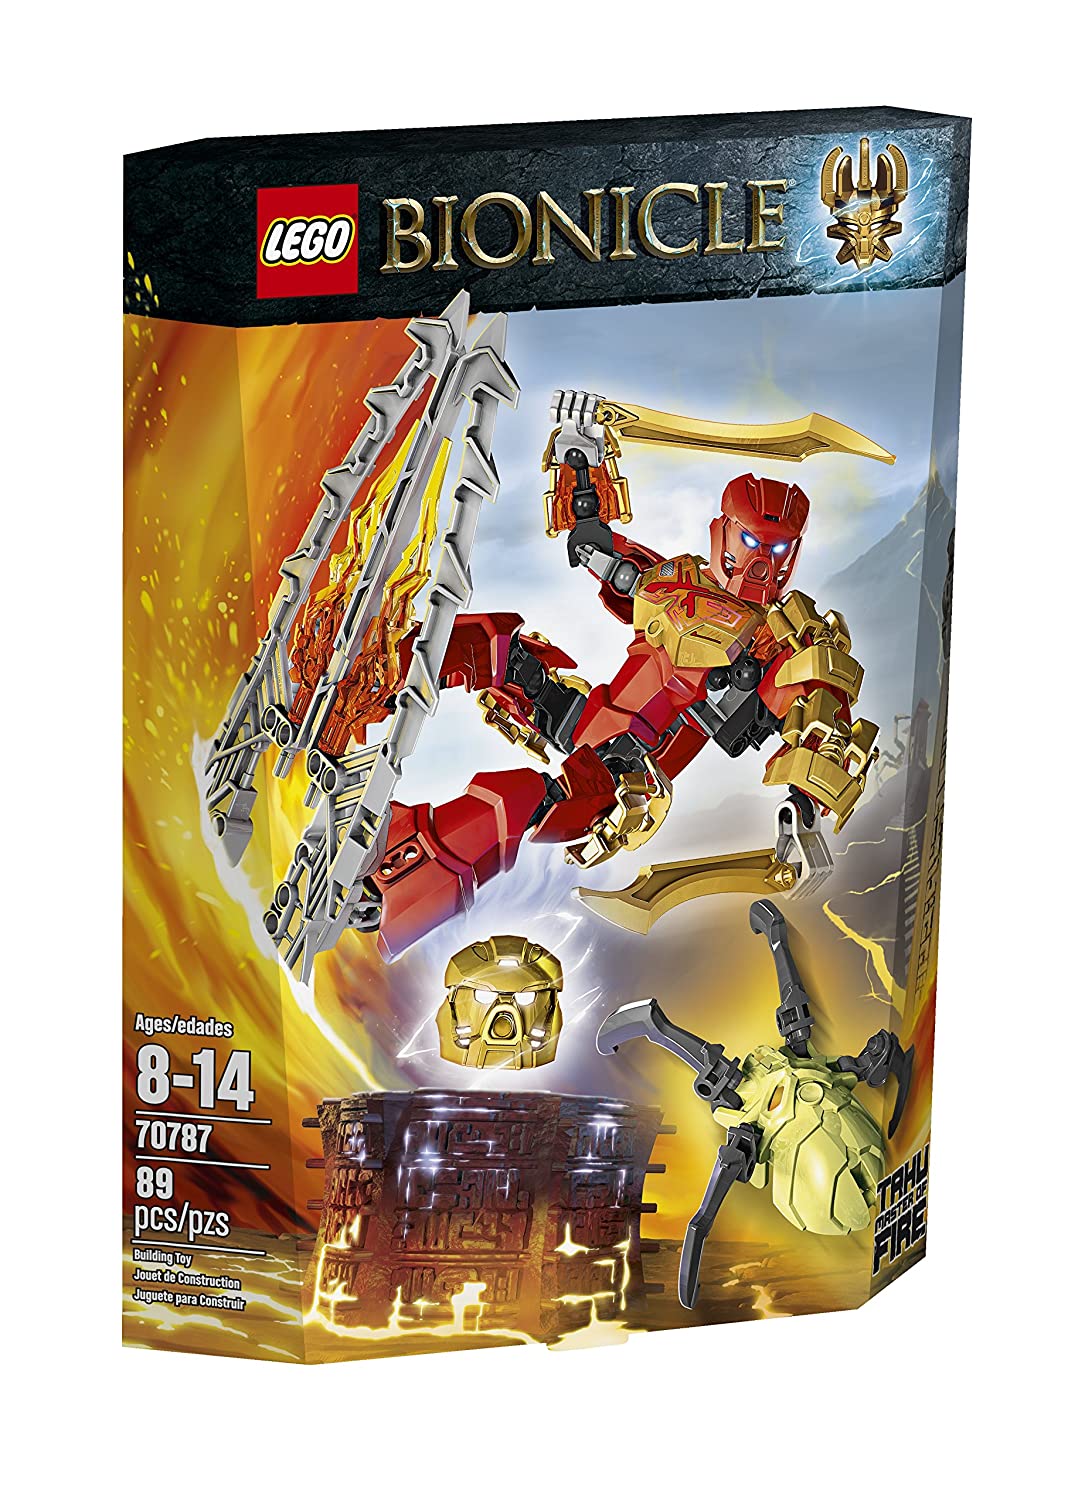 15 Best Lego BIONICLE Sets 2023 - Buying Guide & Reviews 12